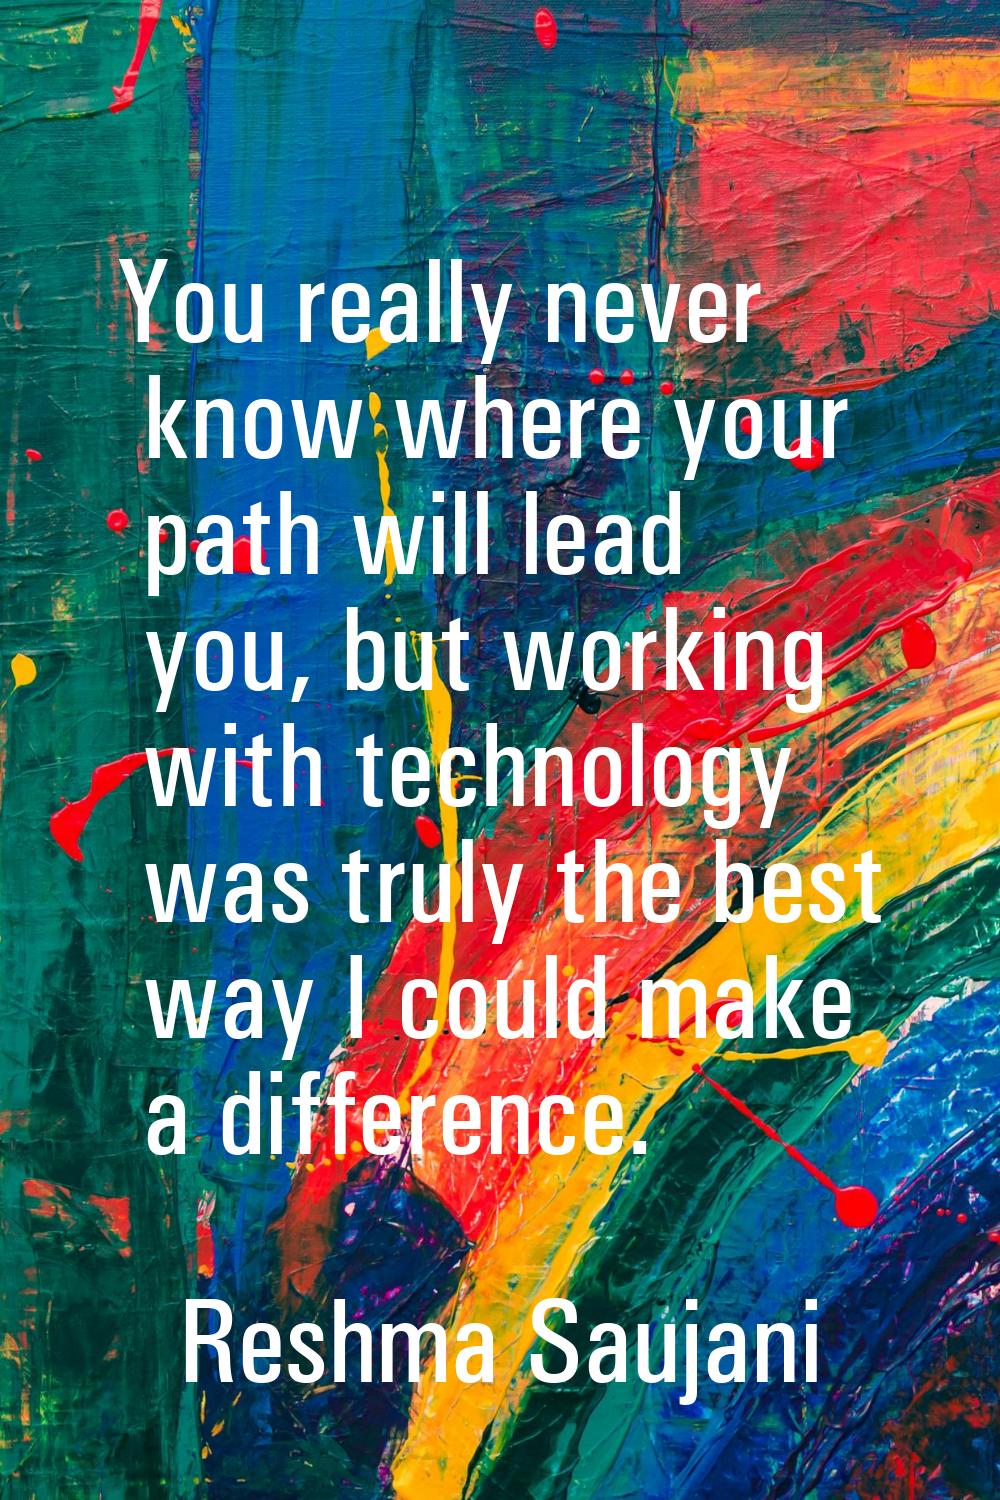 You really never know where your path will lead you, but working with technology was truly the best